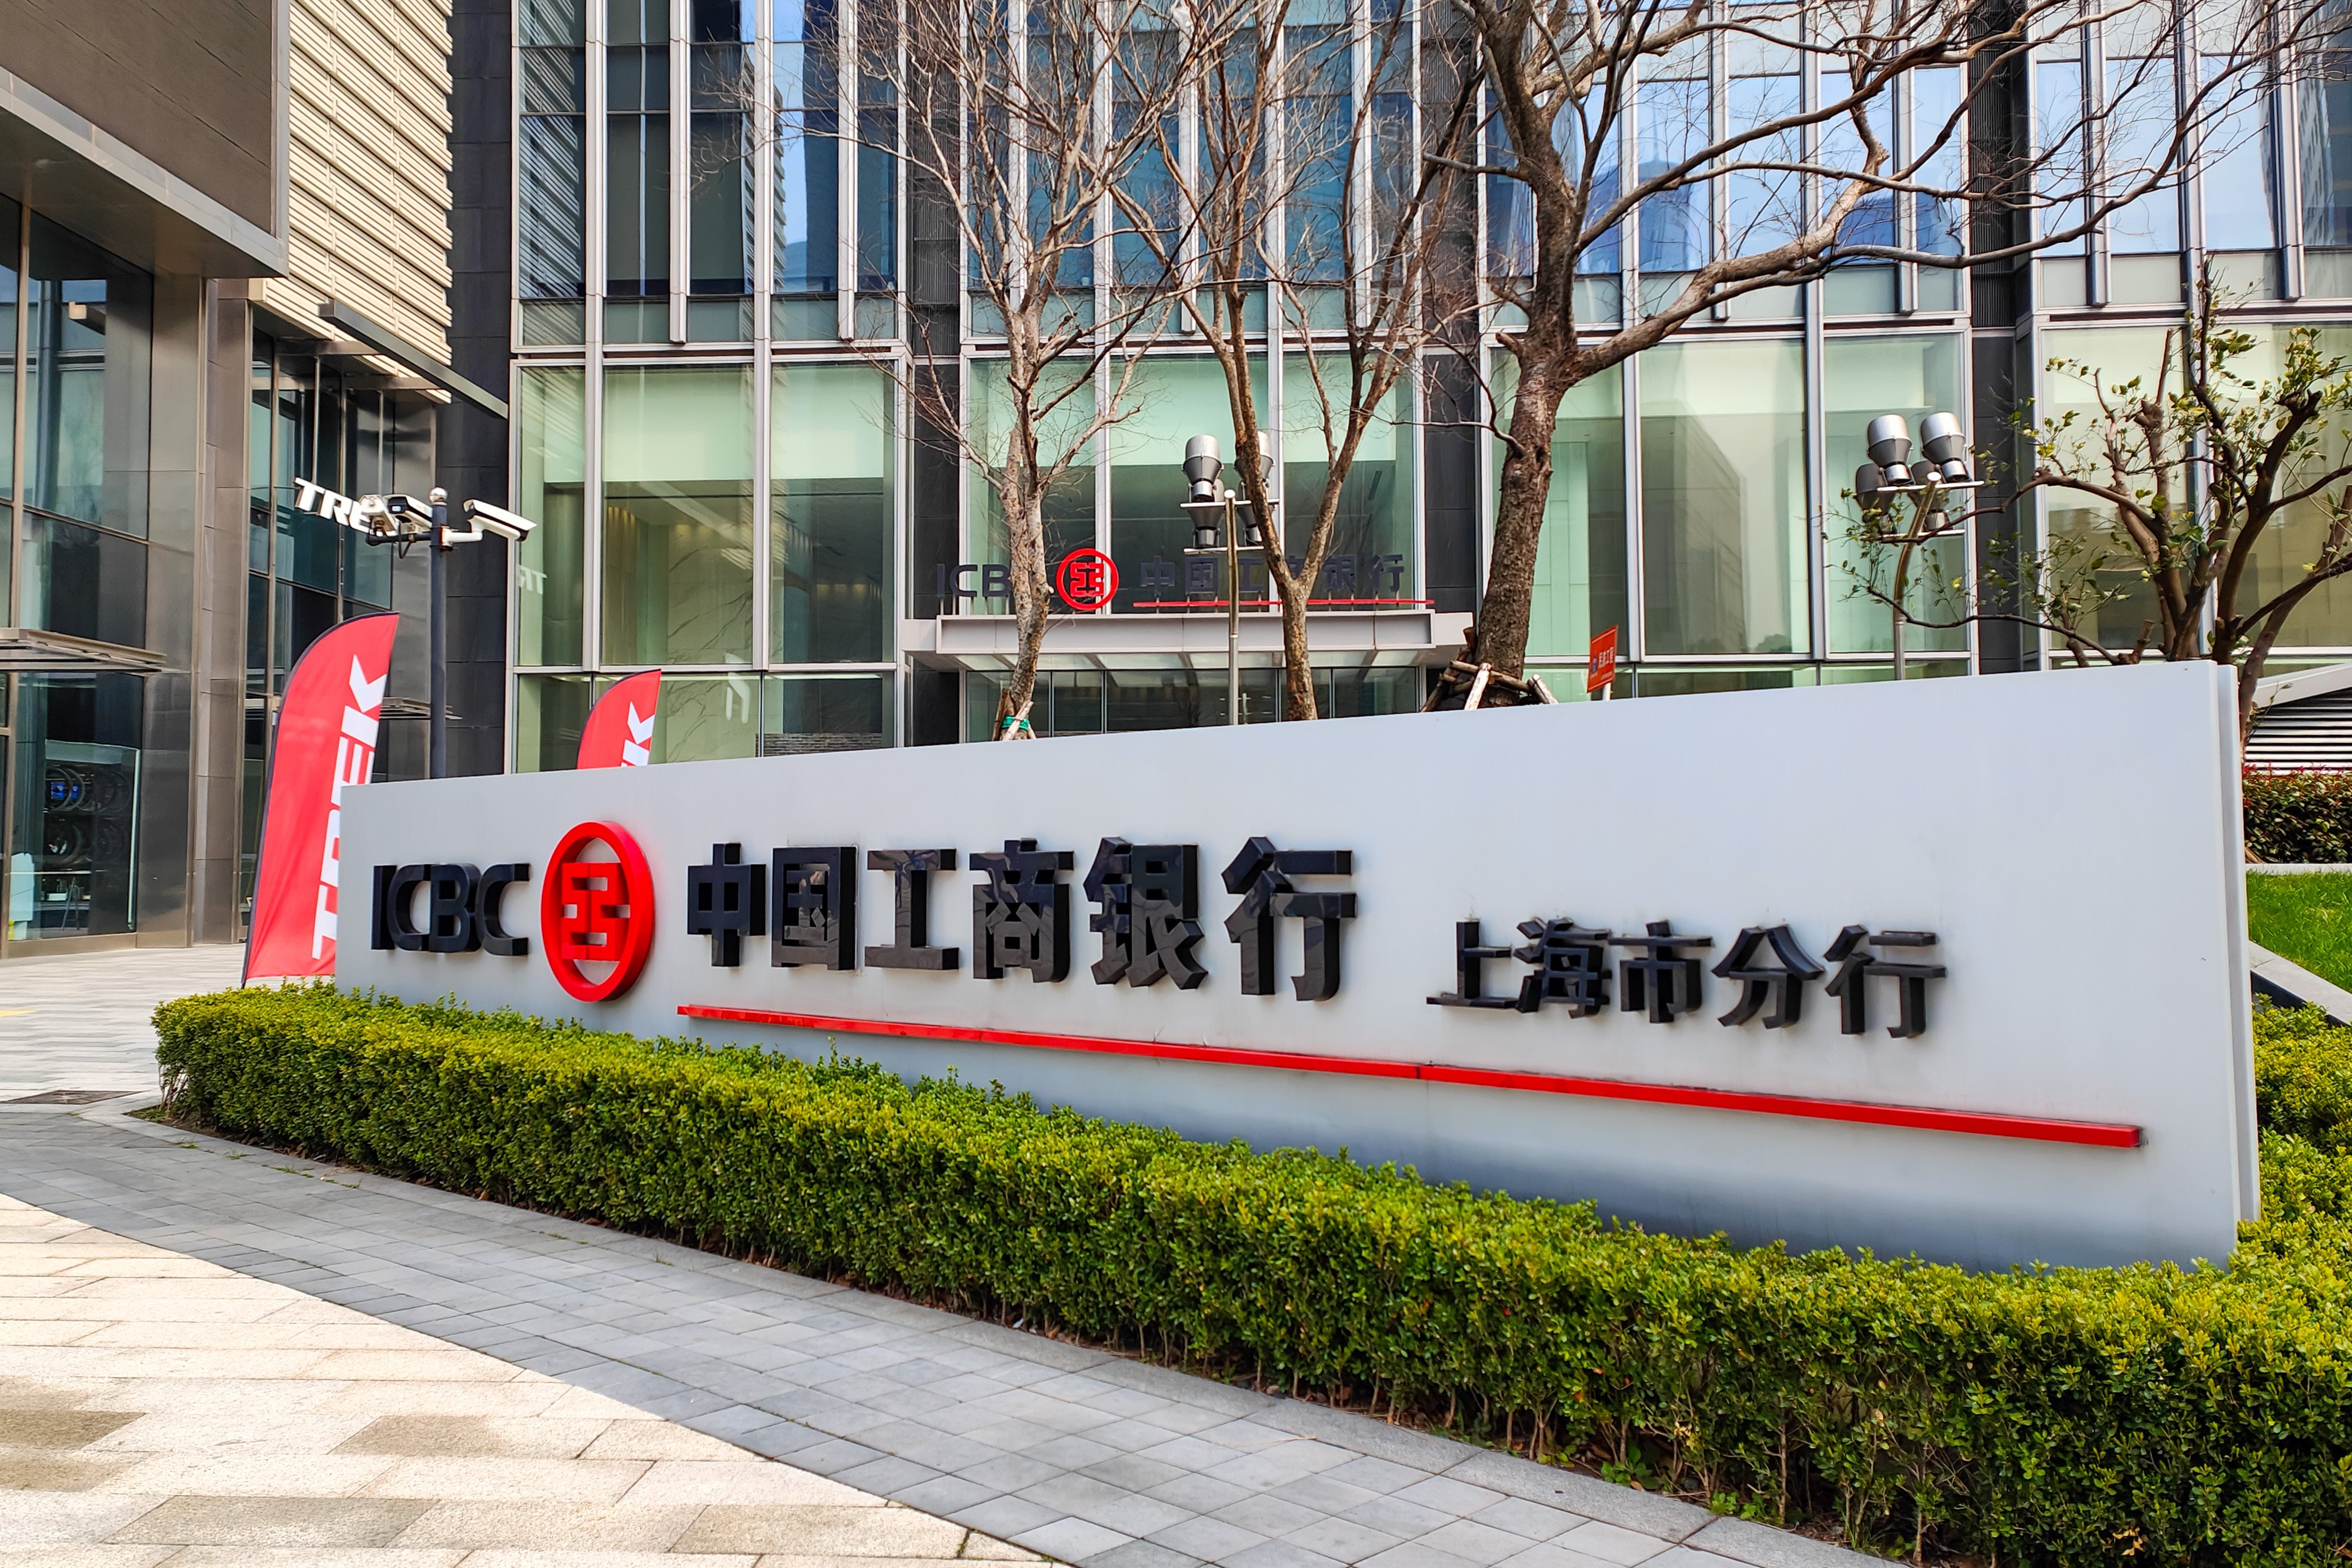 ICBC, as the Chinese lender is known, has invited other banks to participate in the loan. Photo: Future Publishing via Getty Images
